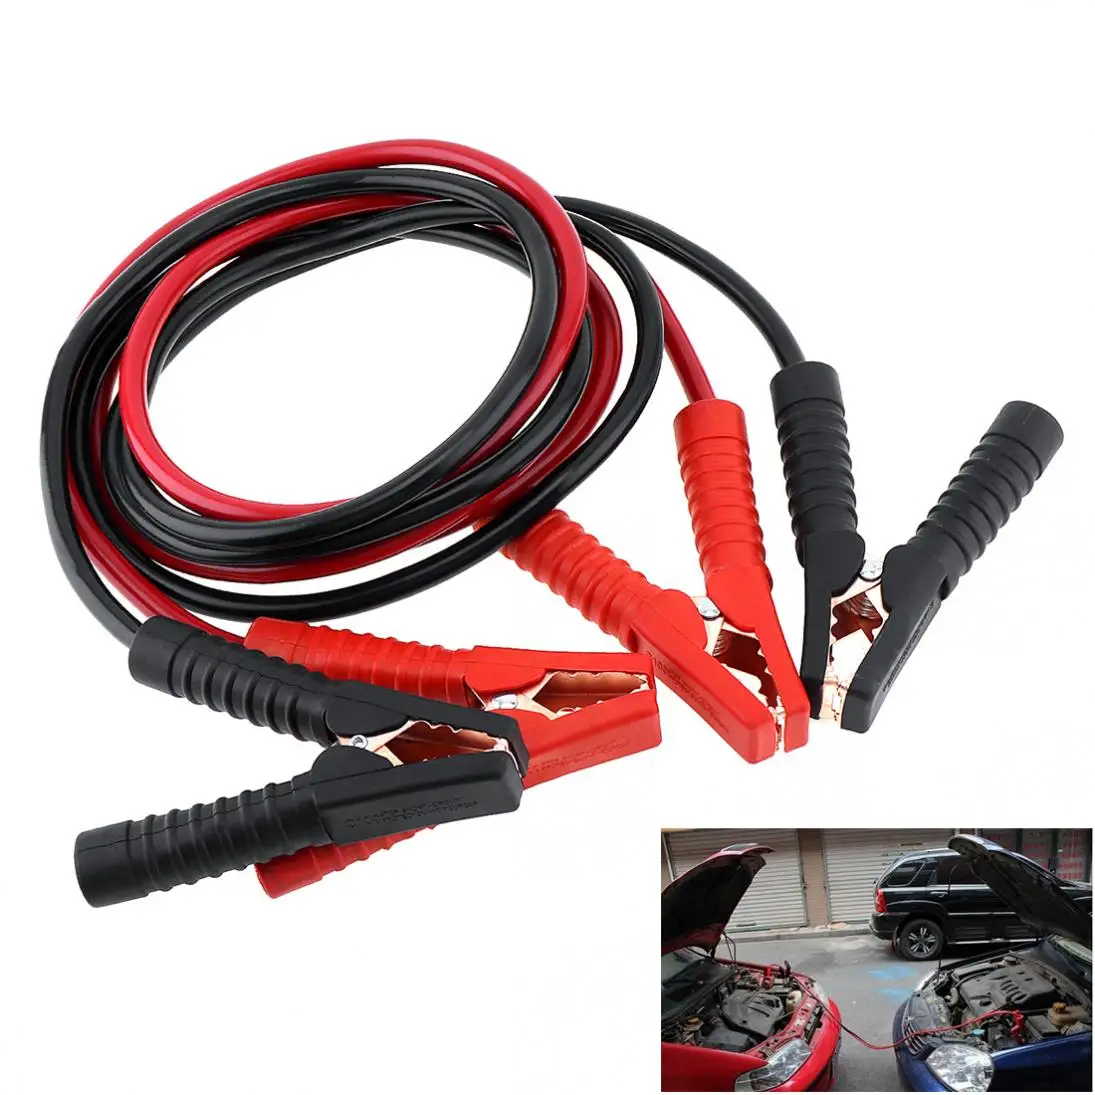 

2.5M 500A 10MM Durable Copper Clad Aluminum Car Emergency Ignition Jump Starter Leads Wire Battery Booster Cable